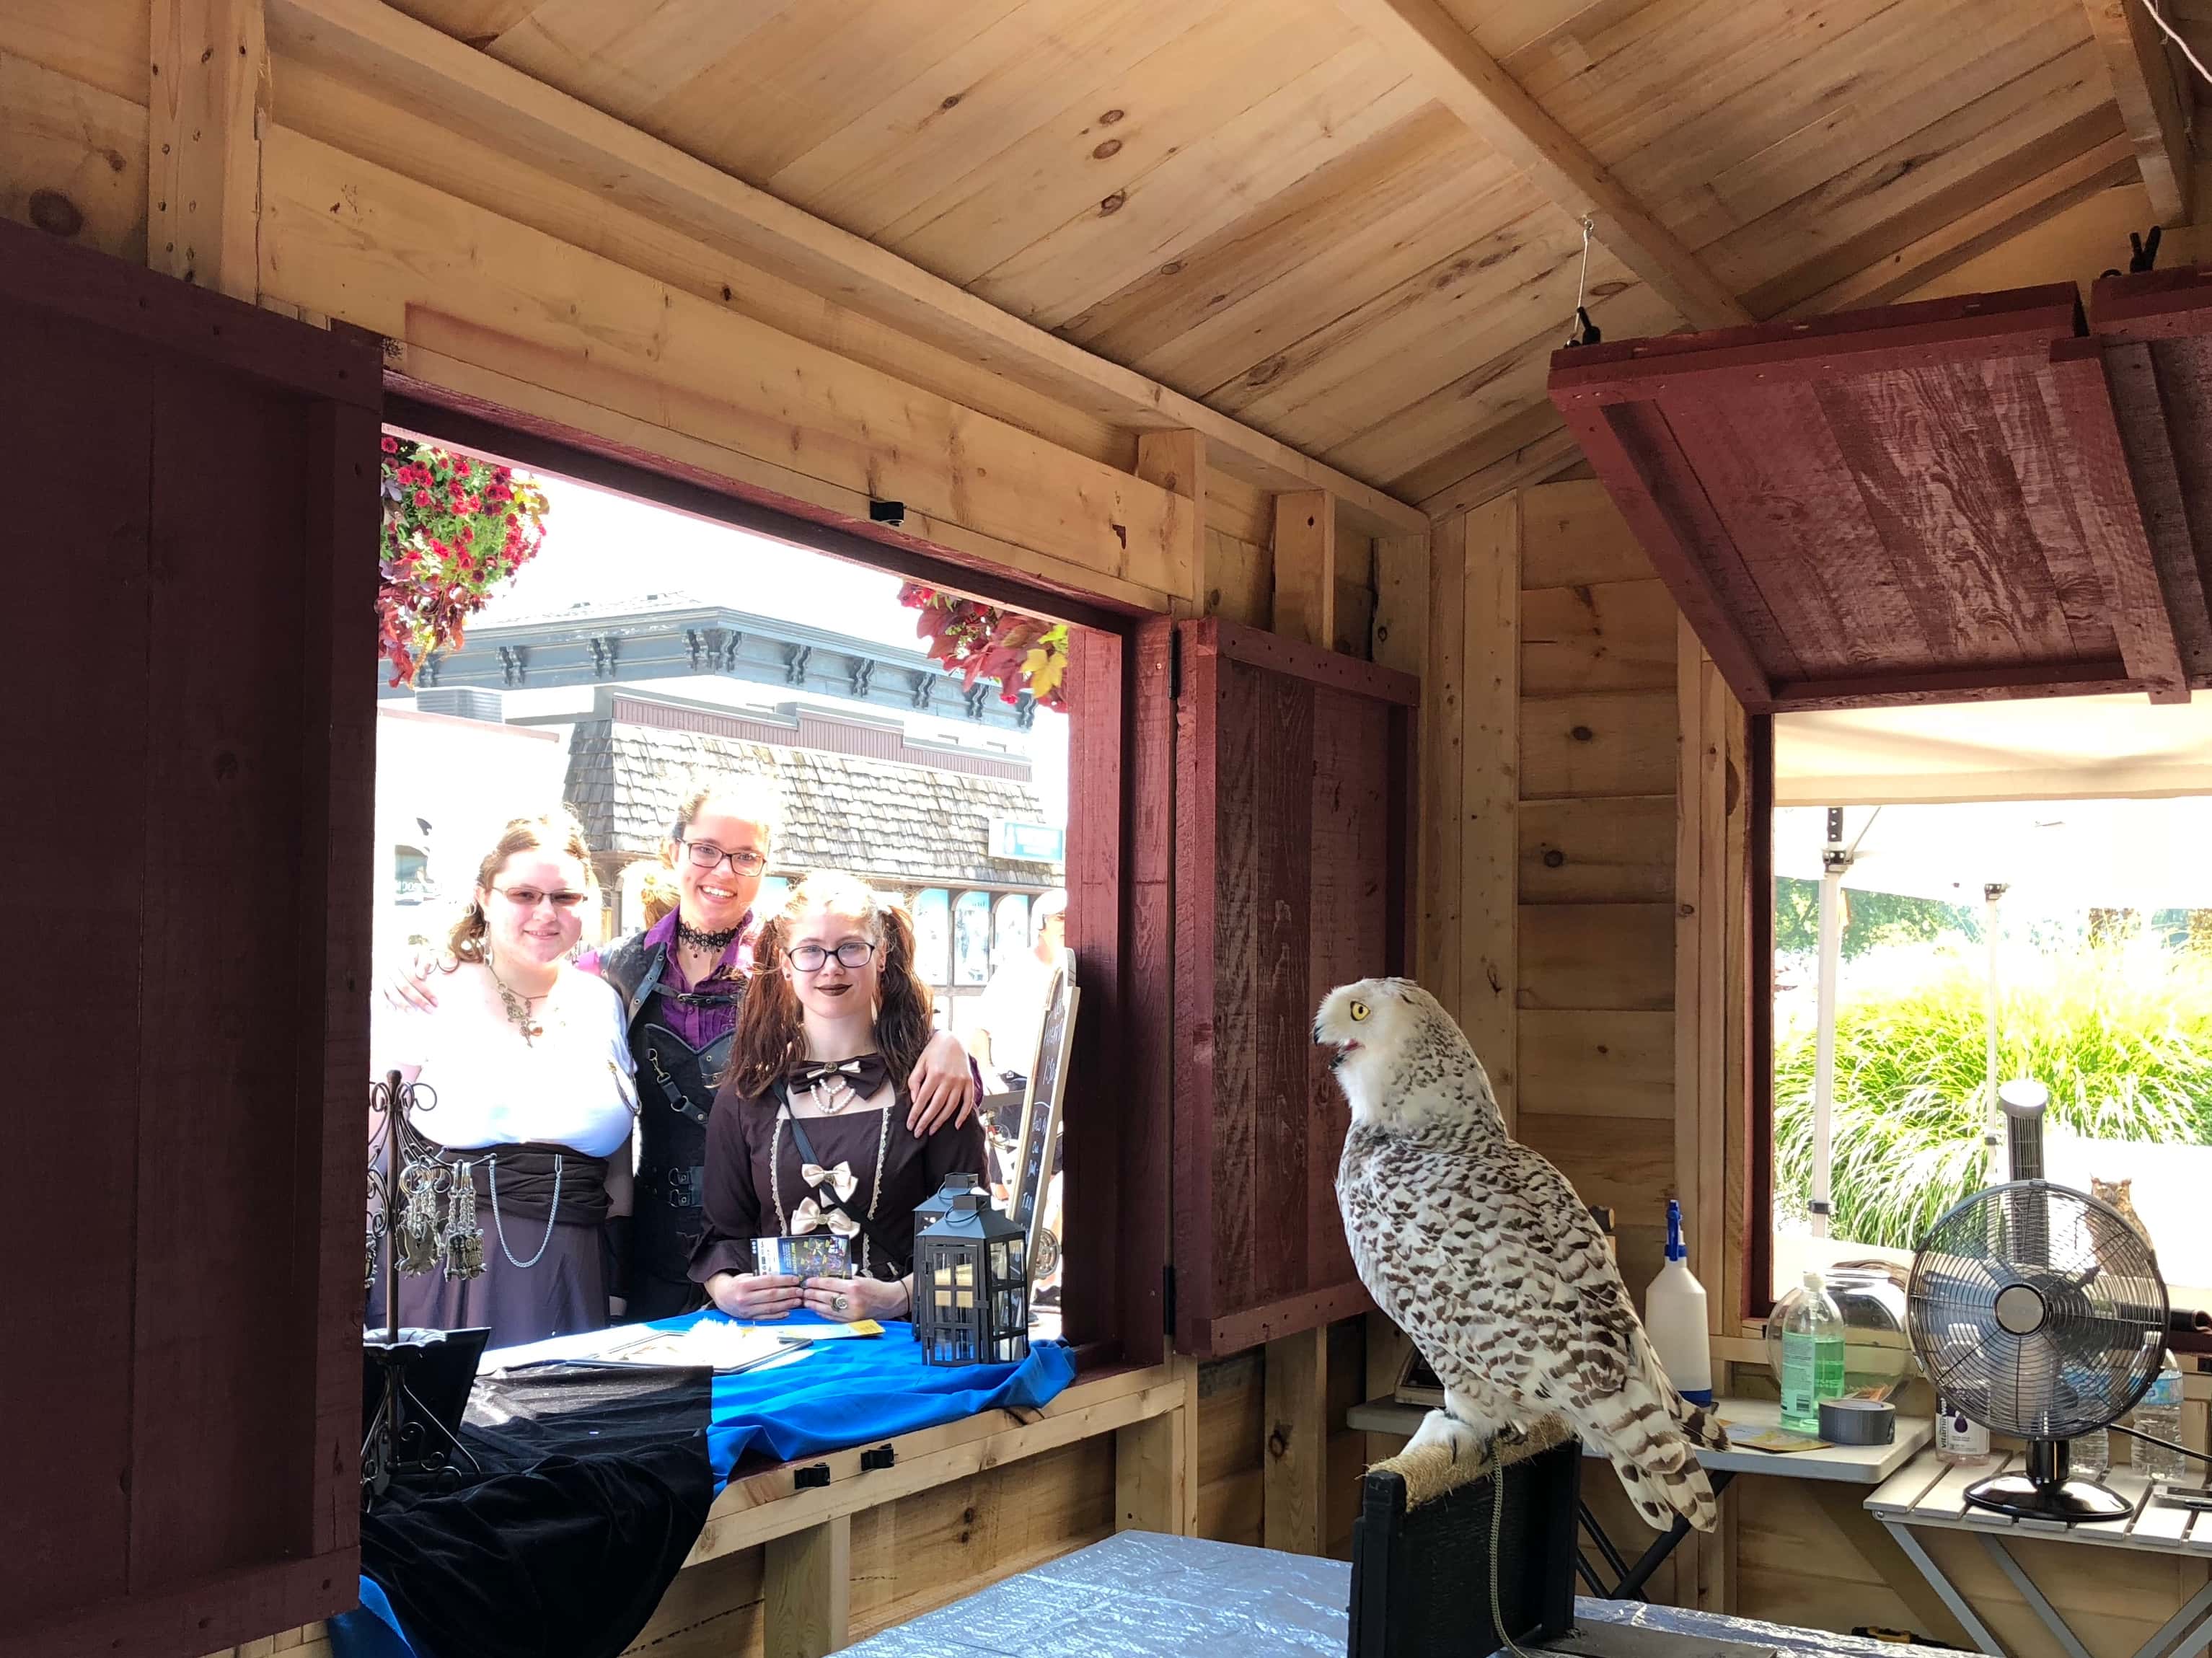 Local festival visitors admire an owl on display